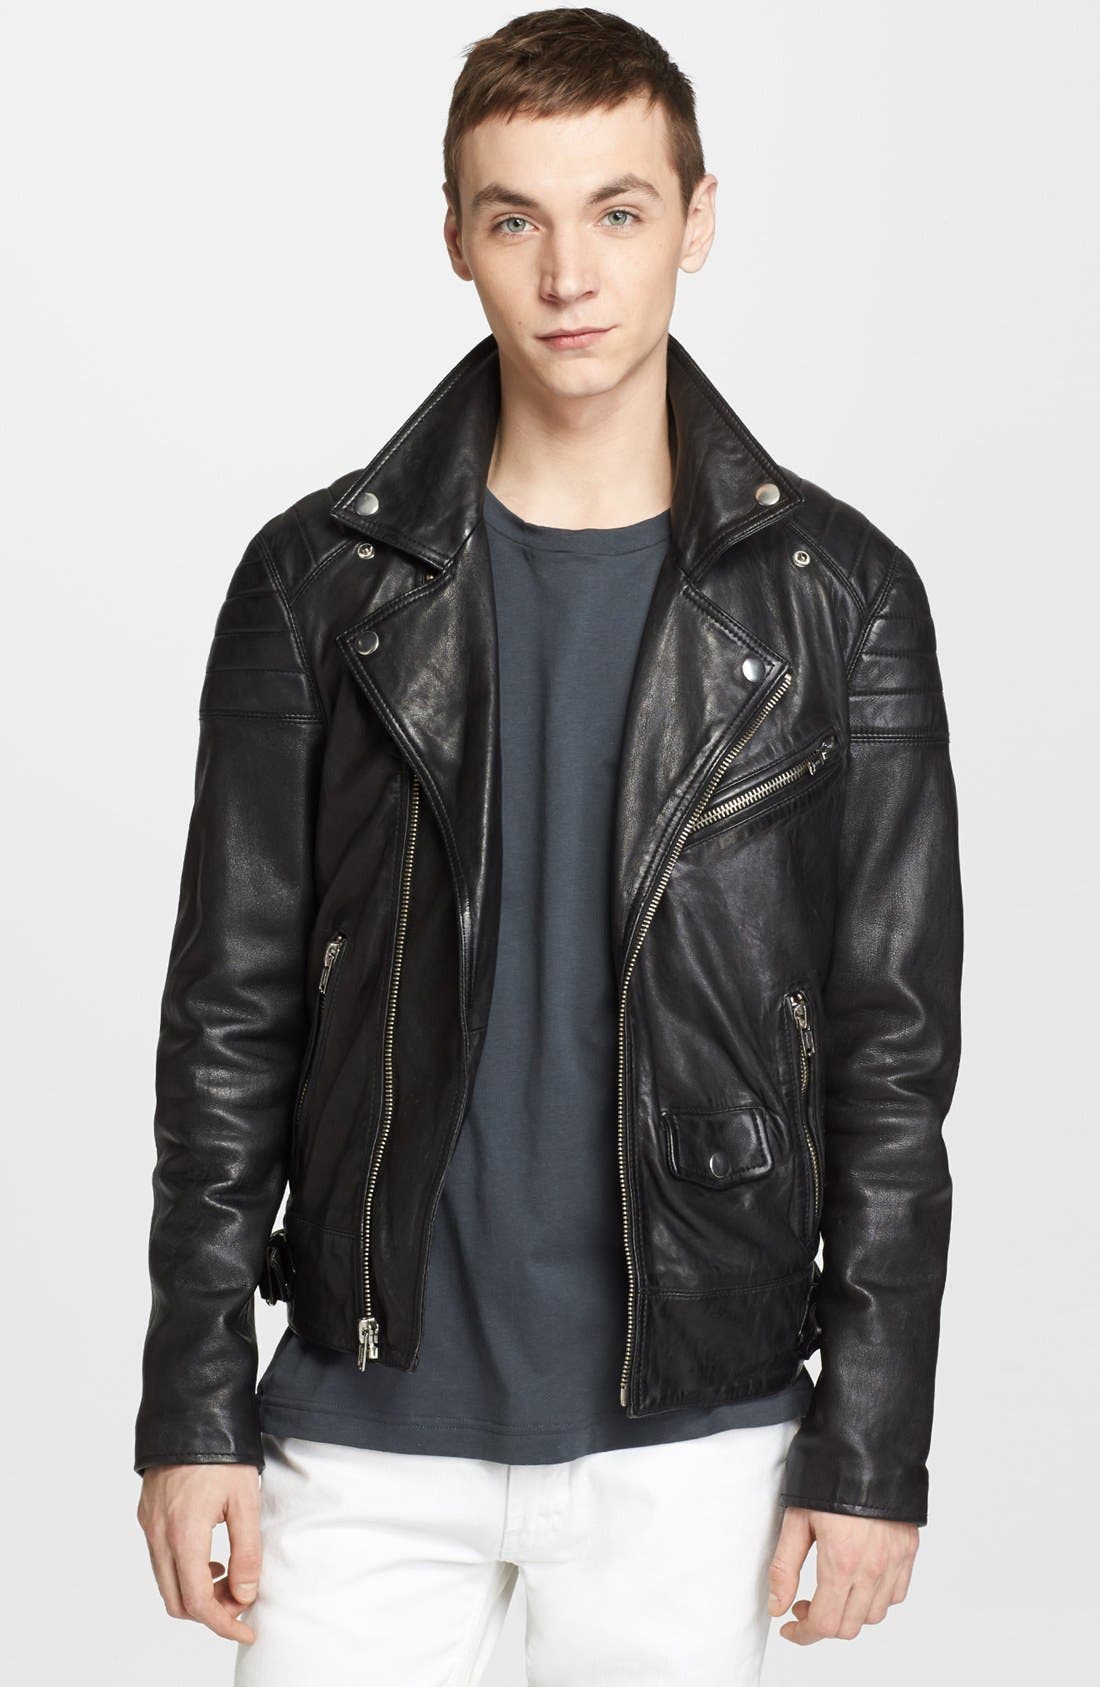 BLK DNM 'Leather Jacket 31' Leather 